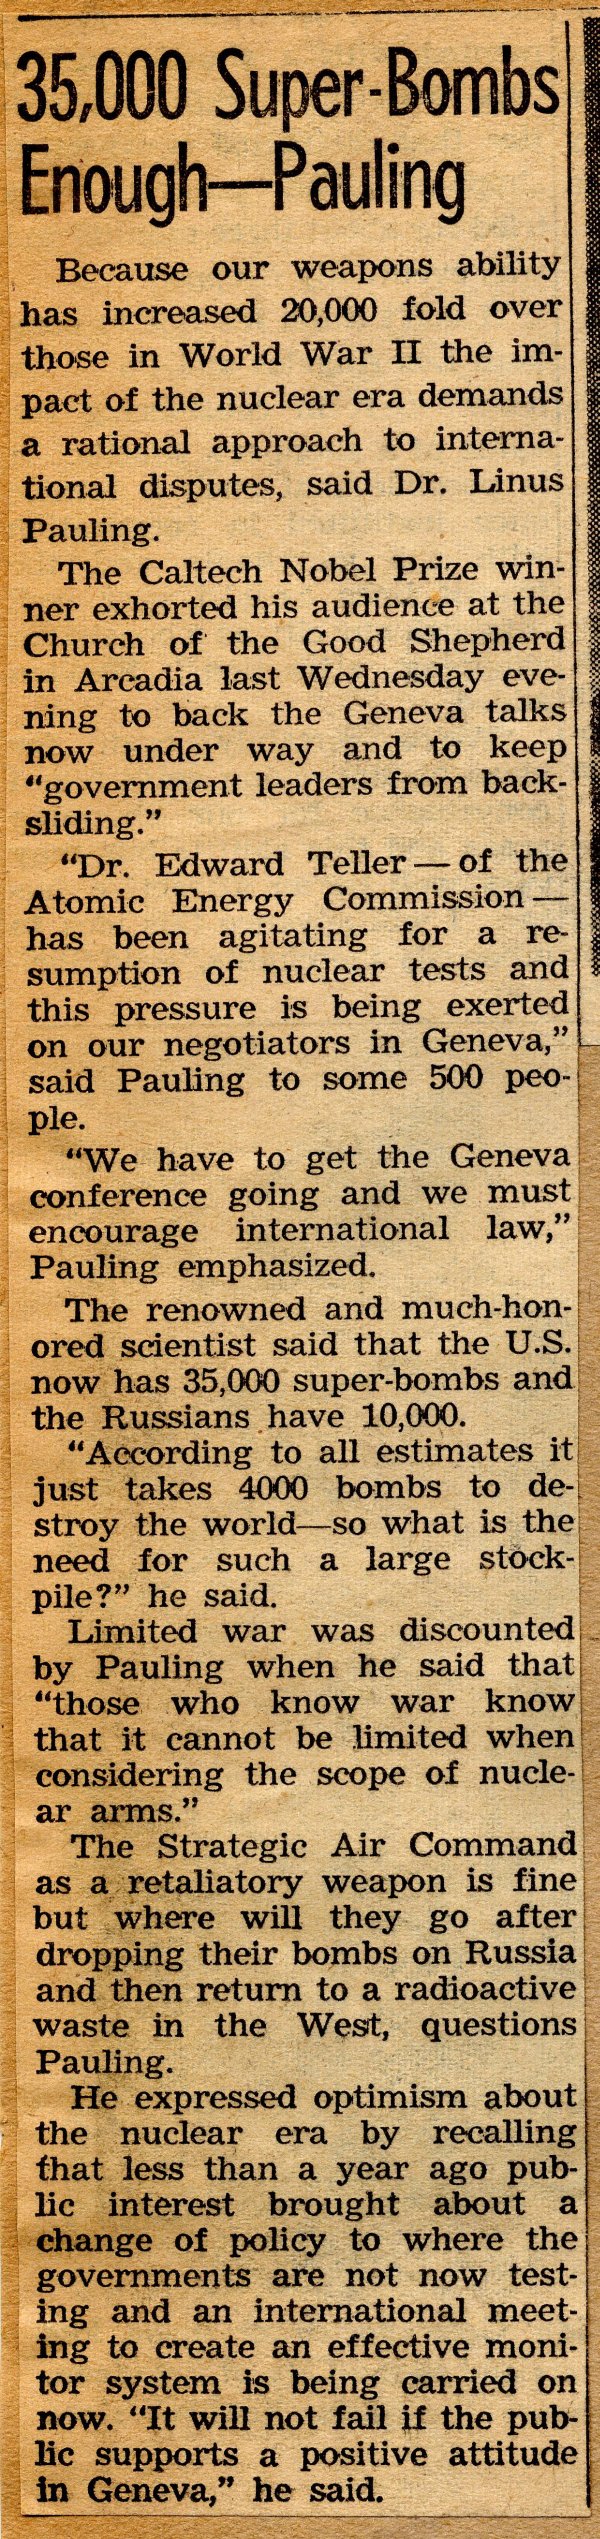 "35,000 Super-Bombs Enough -- Pauling." Page 1. February 4, 1959